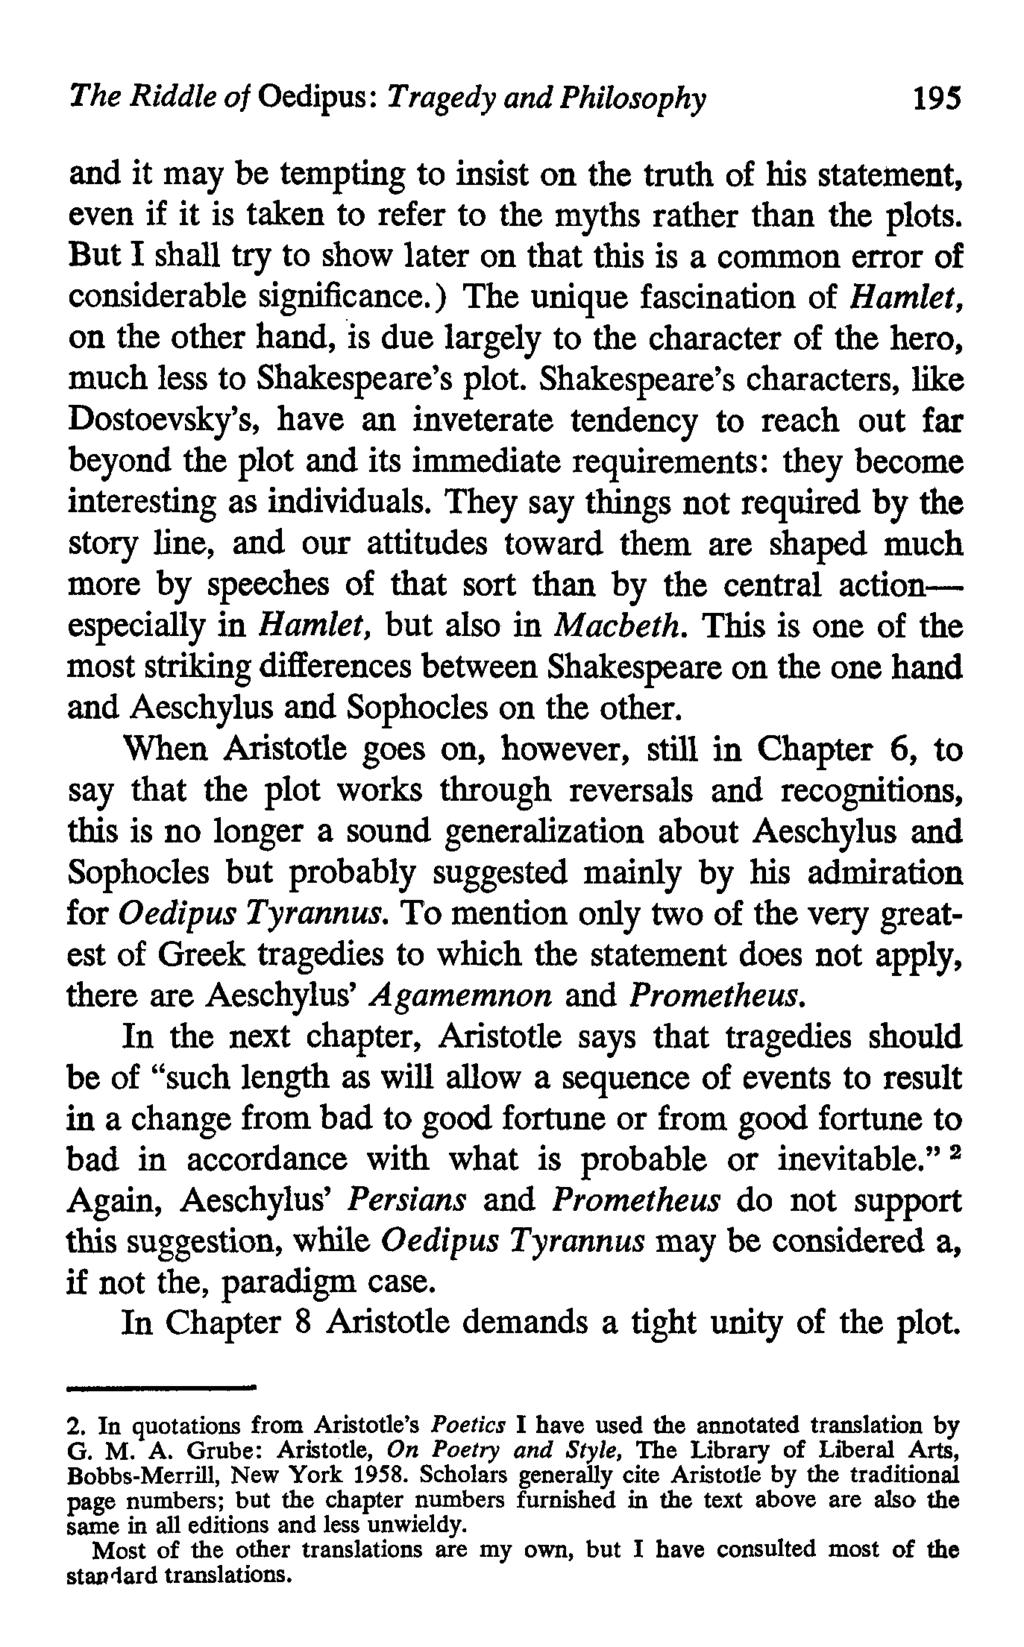 The Riddle of Oedipus: Tragedy and Philosophy 195 and it may be tempting to insist on the truth of his statement, even if it is taken to refer to the myths rather than the plots.